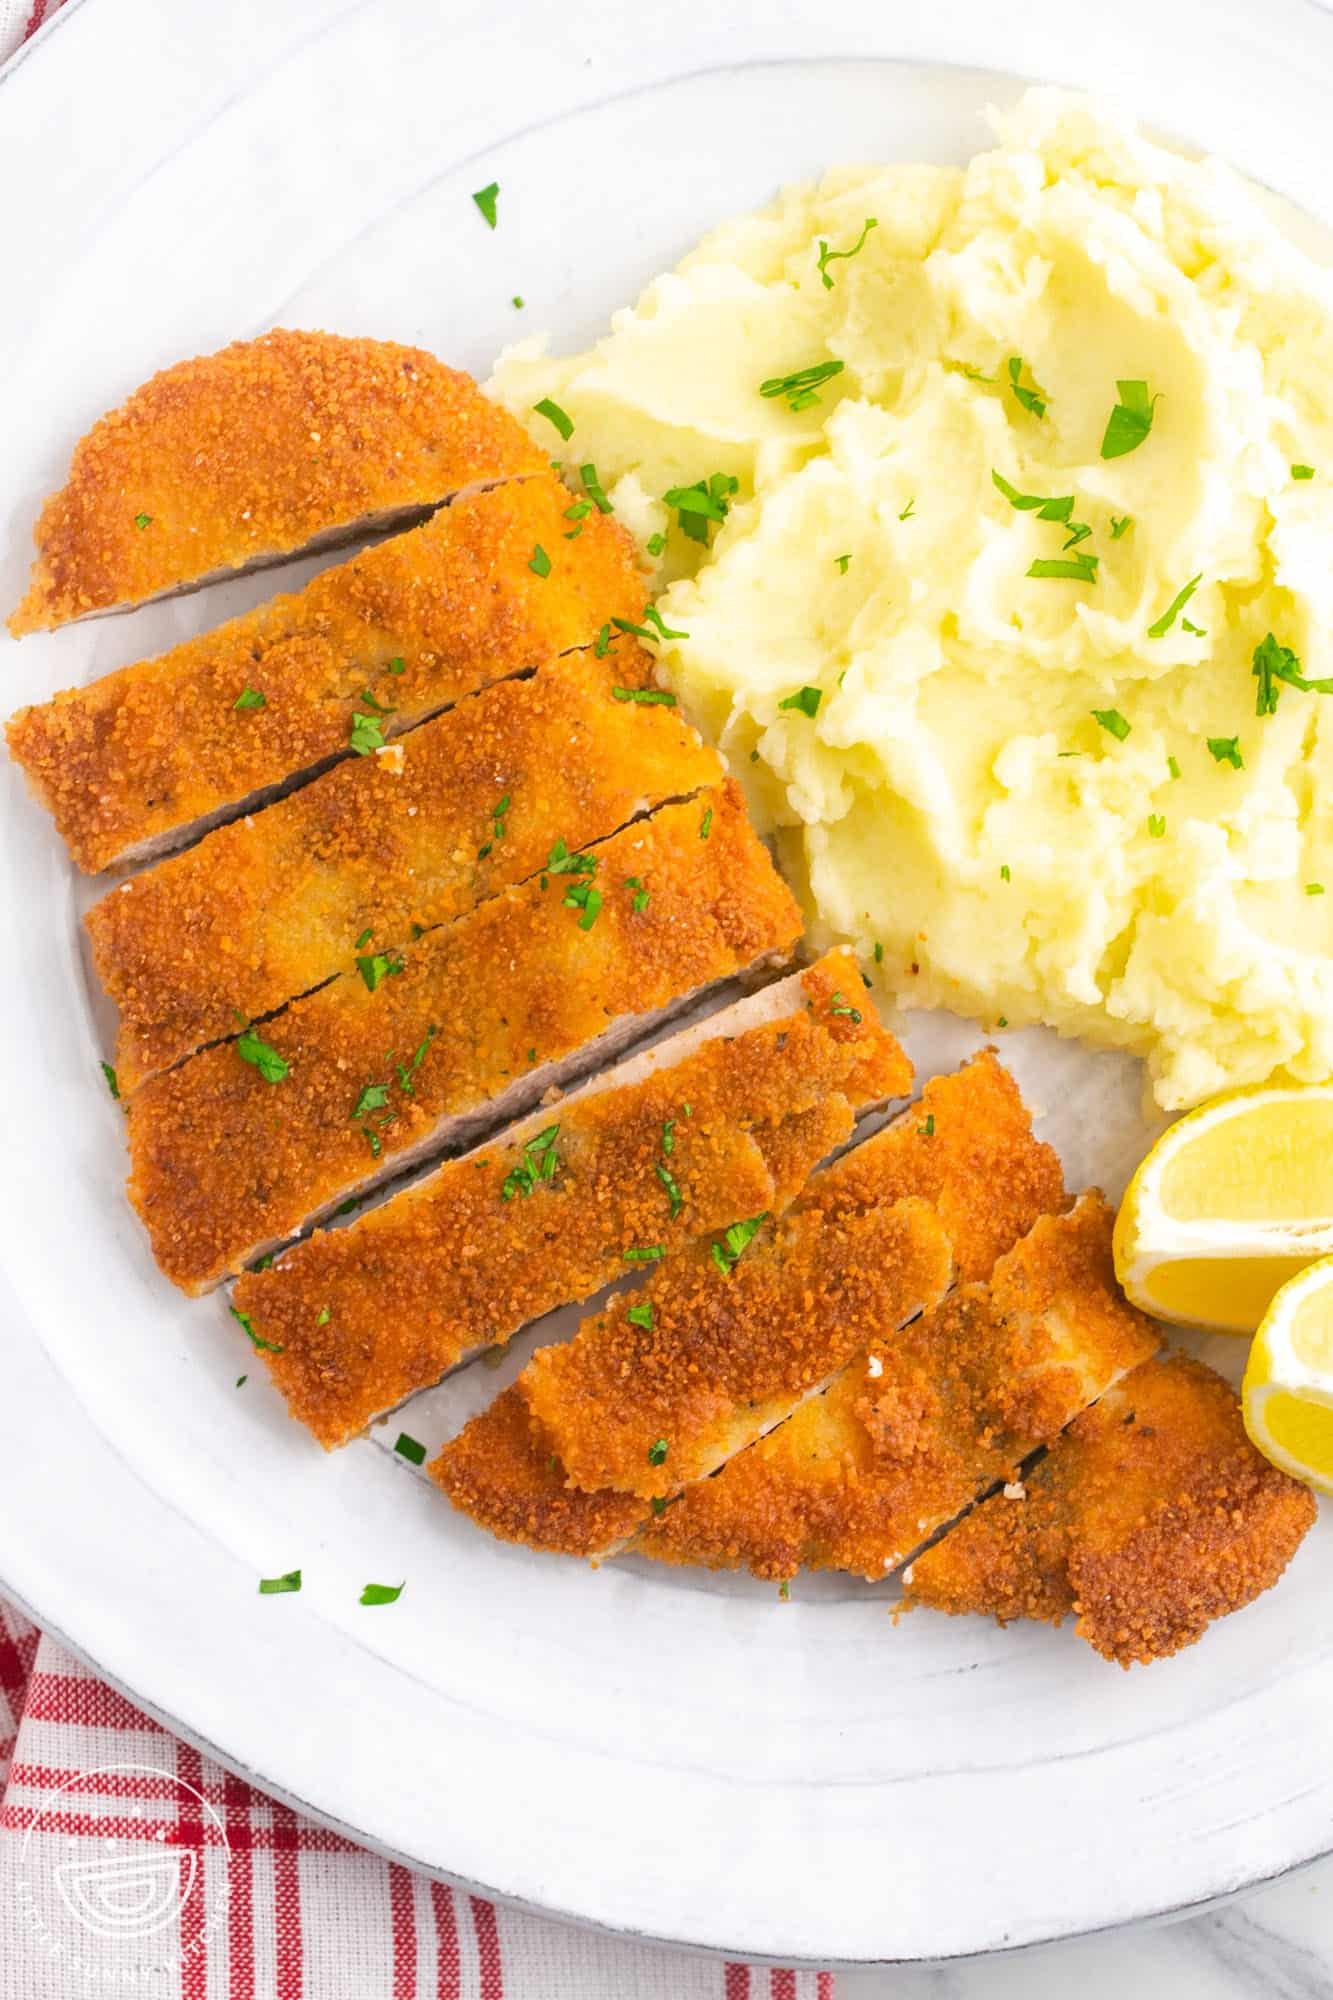 Sliced chicken schnitzel served with creamy mashed potatoes on a white plate